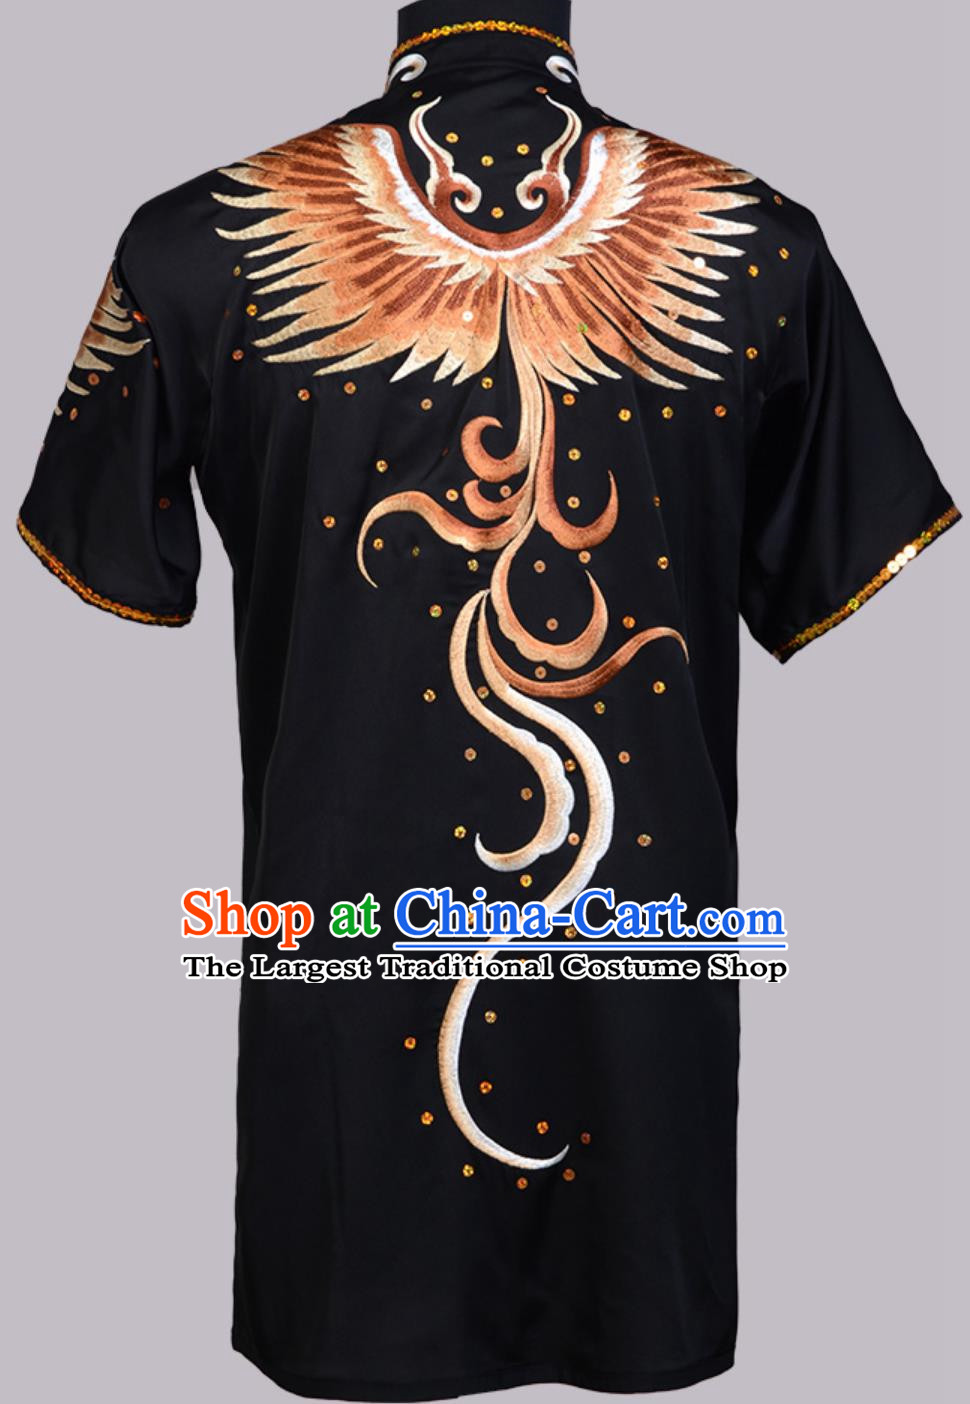 Chinese,qipao,Chinese,jackets,Chinese,handbags,Chinese,wallets,Search,Buy,Purchase,for,You,Online,Shopping